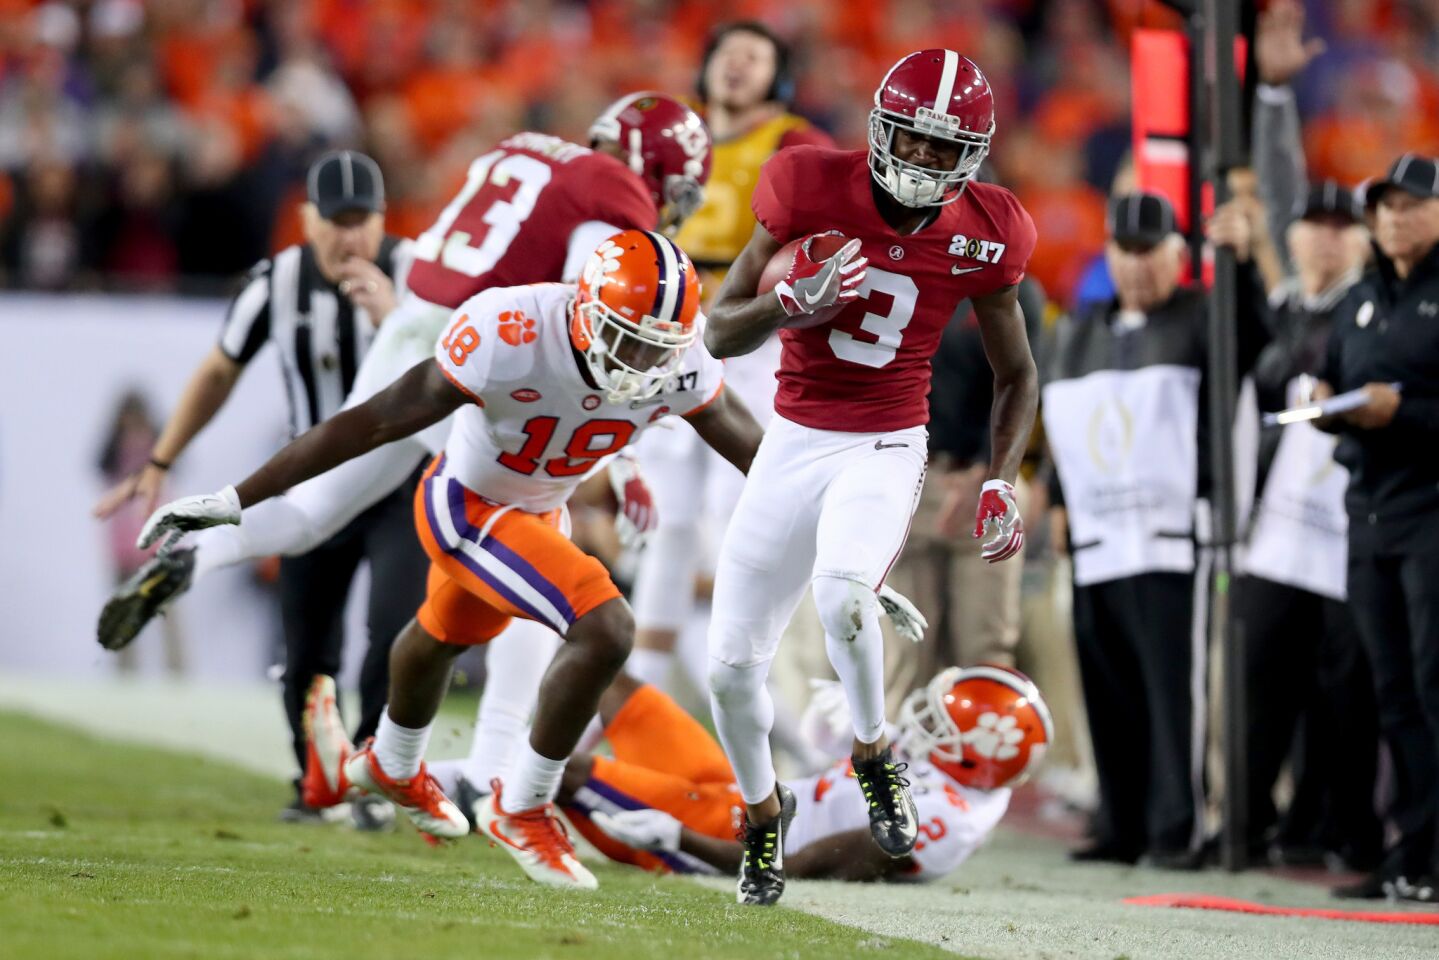 Alabama receiver Calvin Ridley tip-toes down the sideline after getting hit by Clemson defenders during the second quarter.